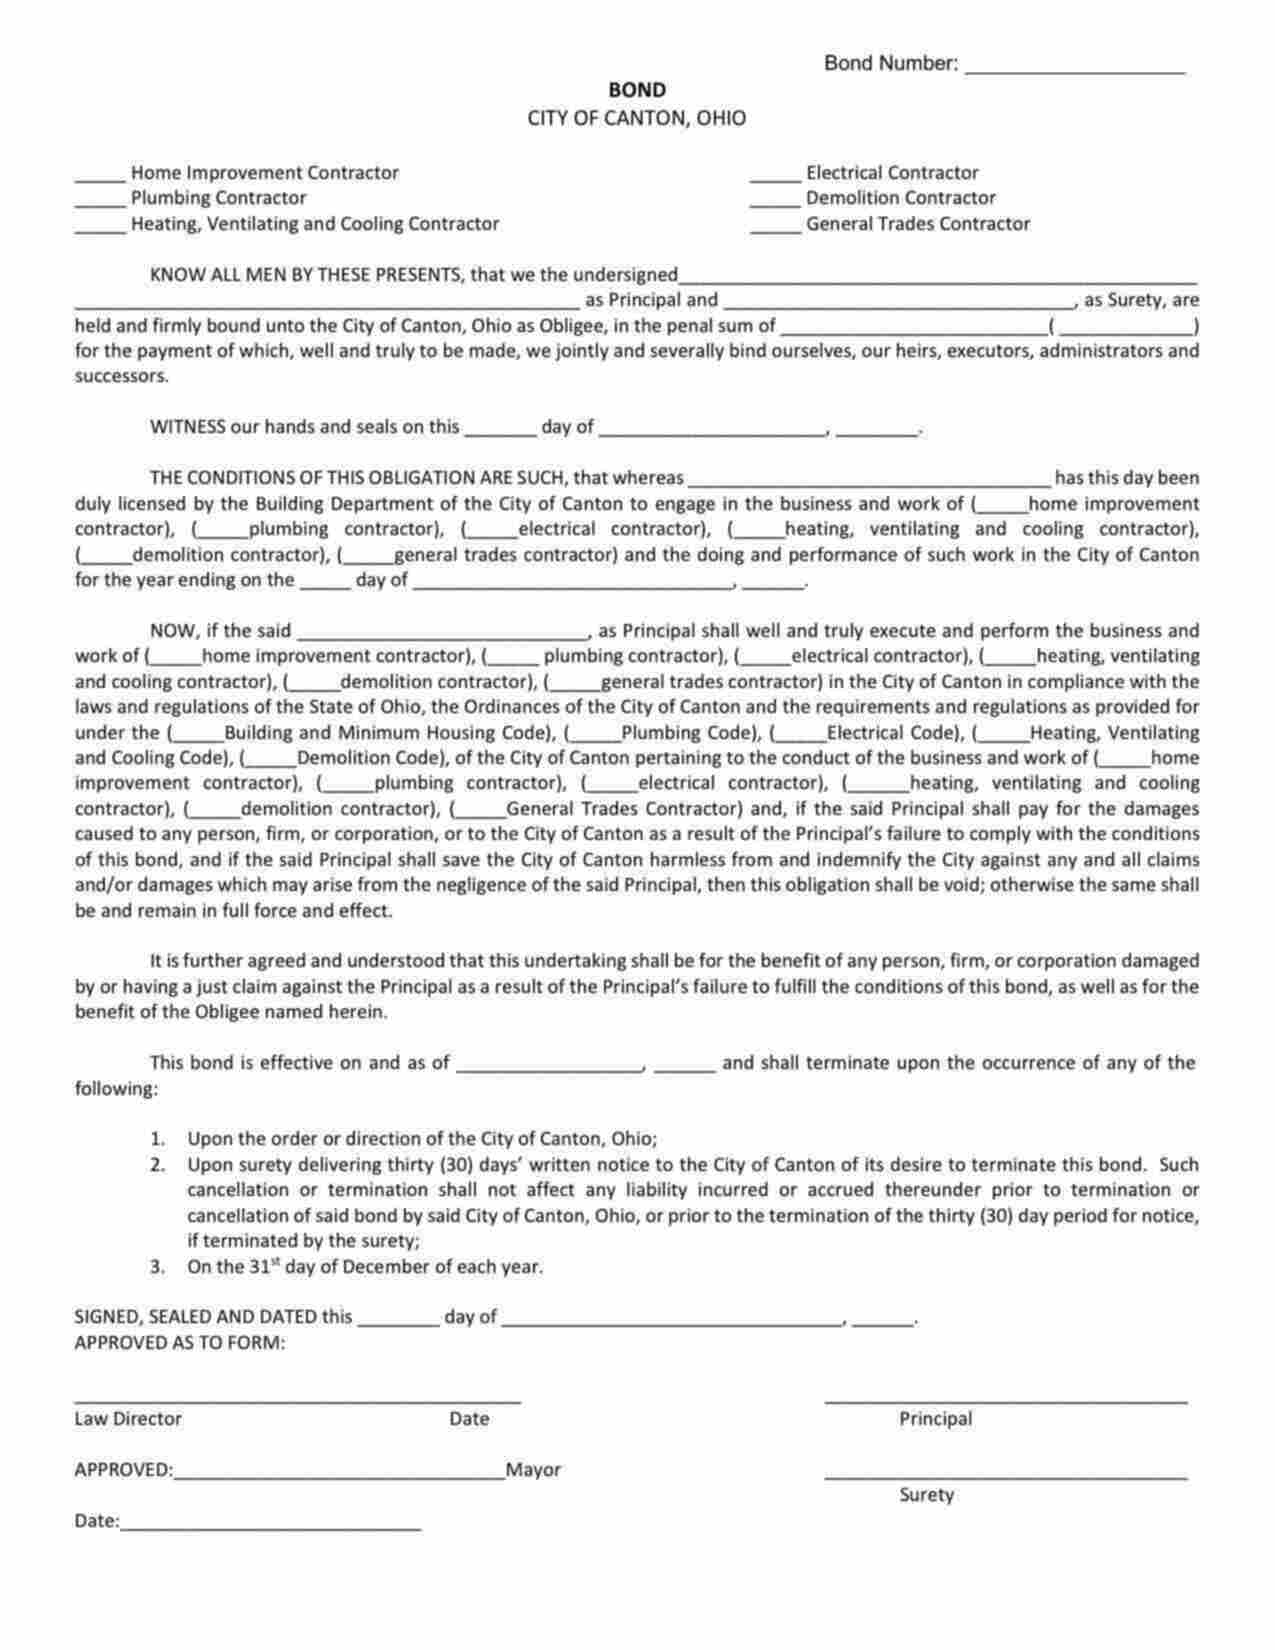 Ohio Electrical Contractor Bond Form